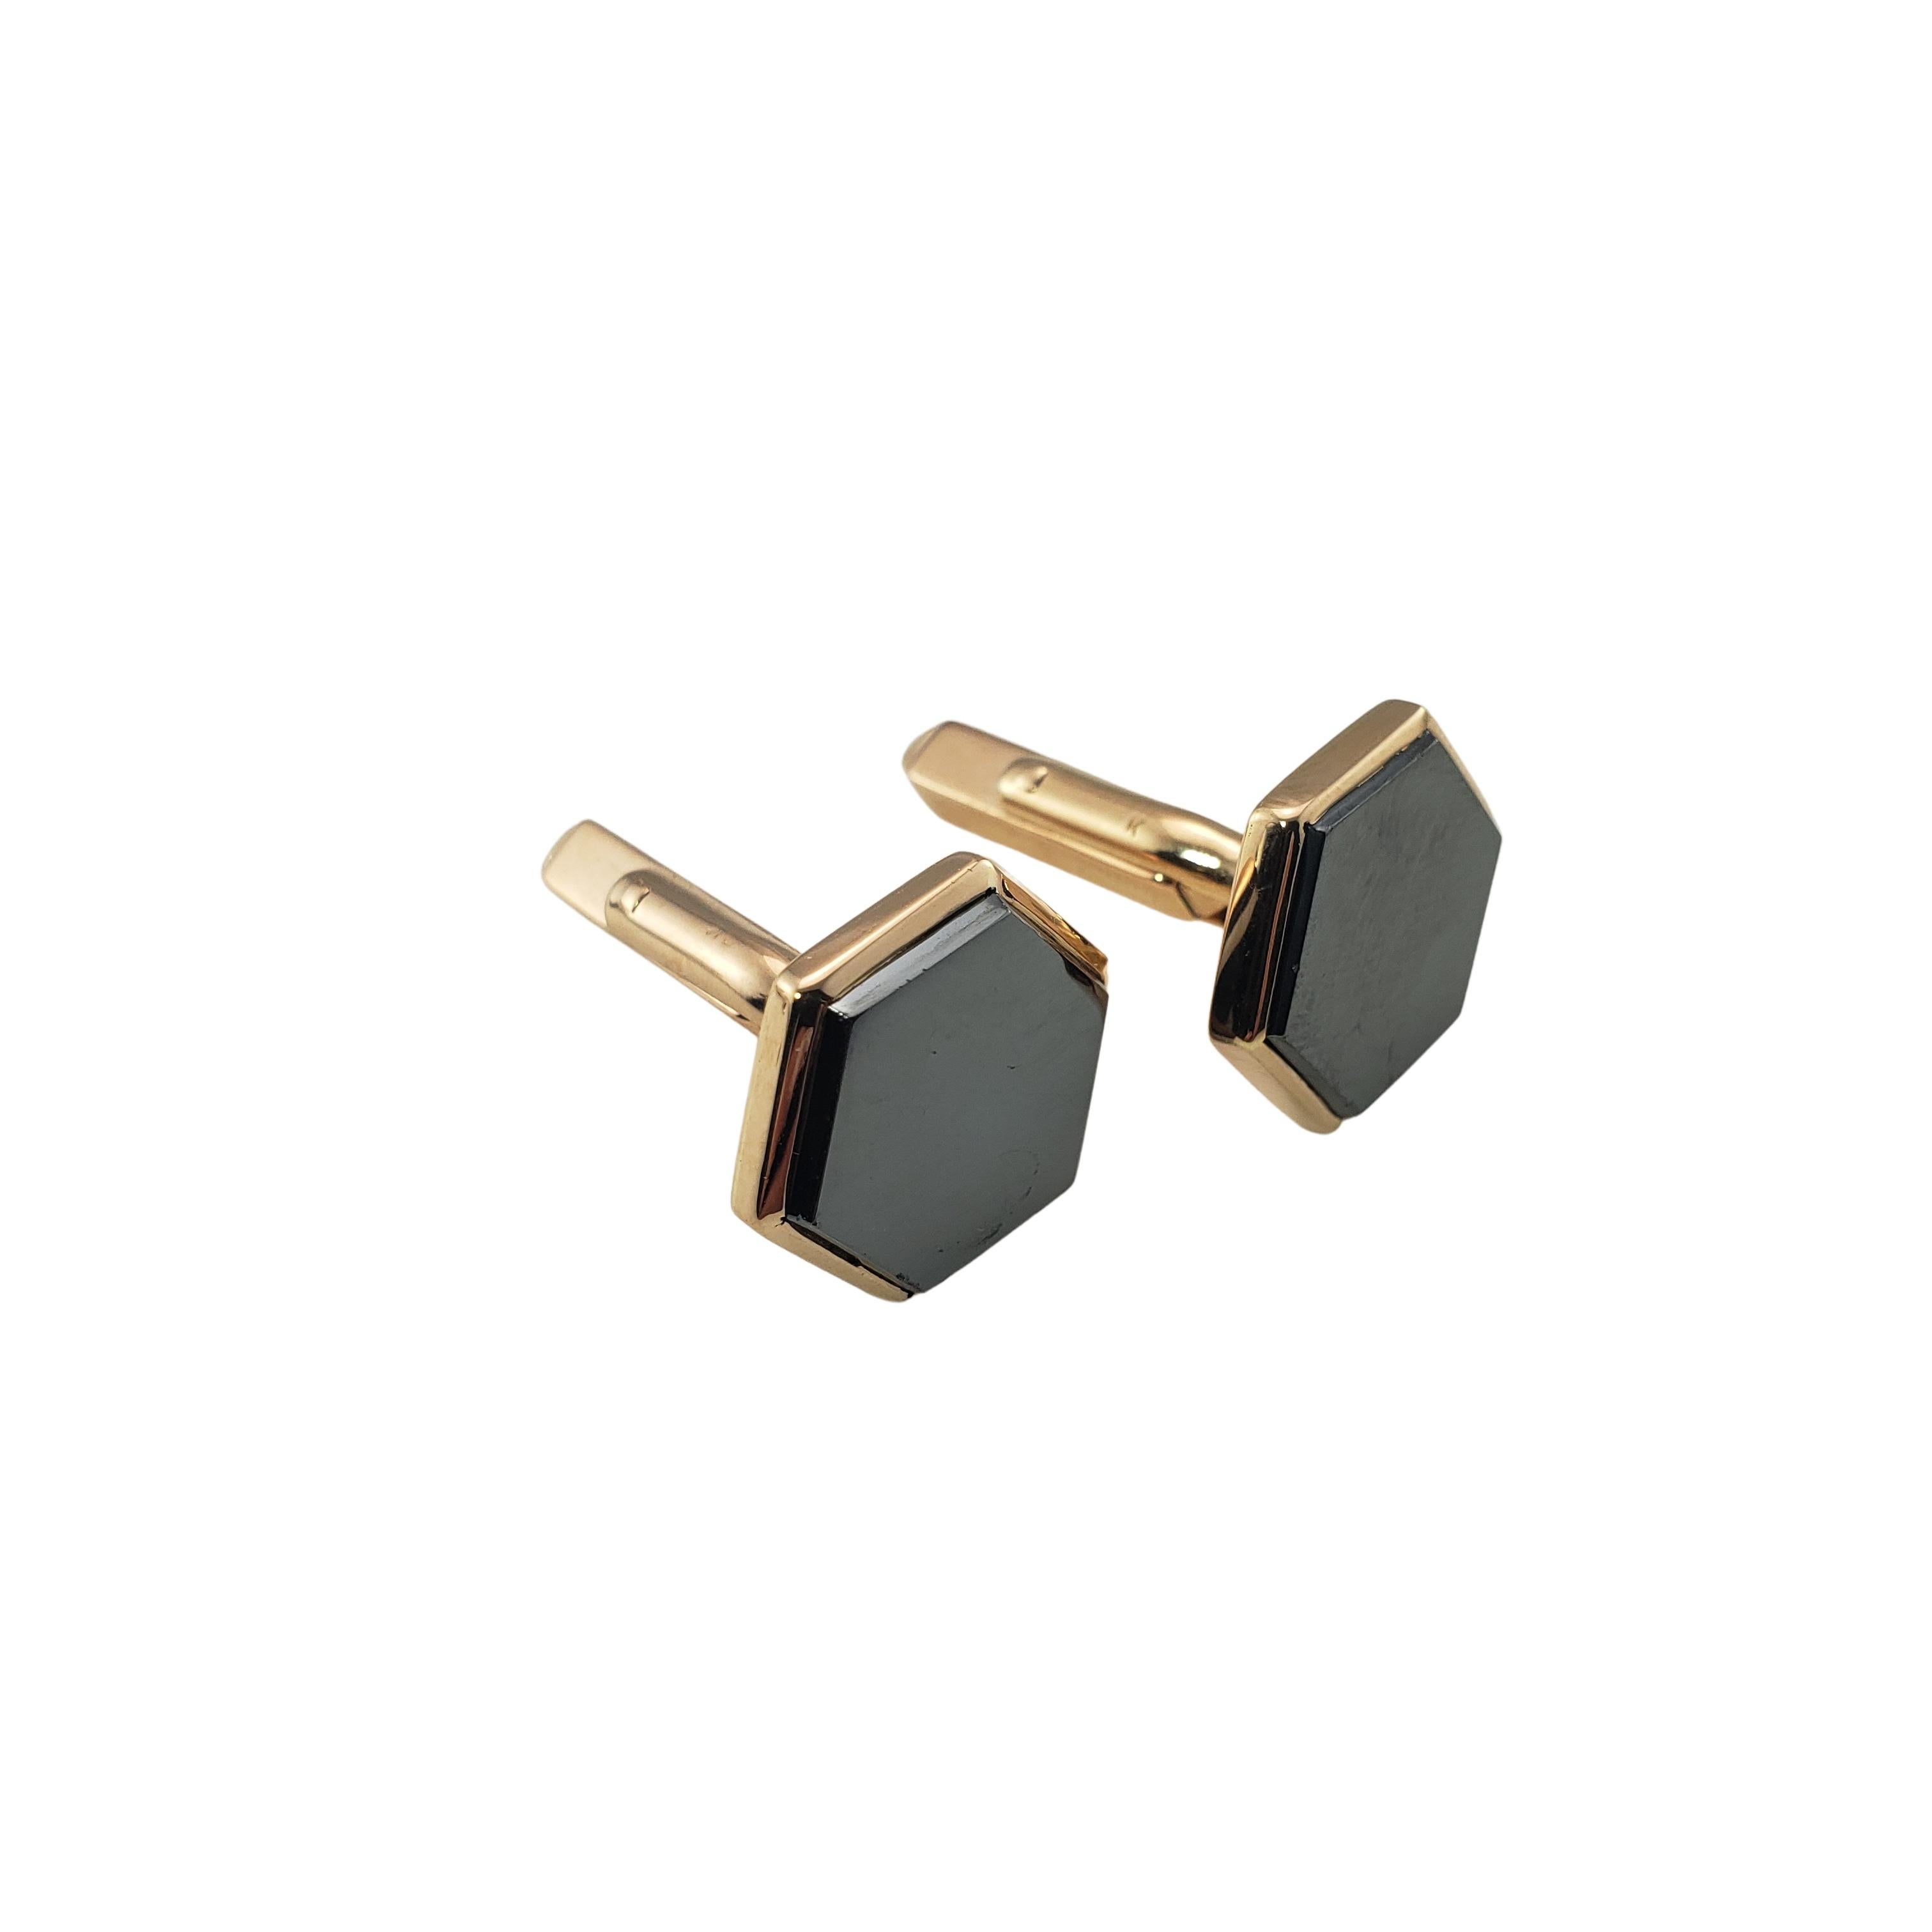 Vintage 18 Karat Yellow Gold and Hematite Cufflinks-

These elegant cufflinks feature lustrous hematite set in beautifully detailed 18K yellow gold.

Size: 17 mm

Weight: 9.4 dwt. / 14.7 gr.

Tested for 18K gold.

Very good condition, professionally